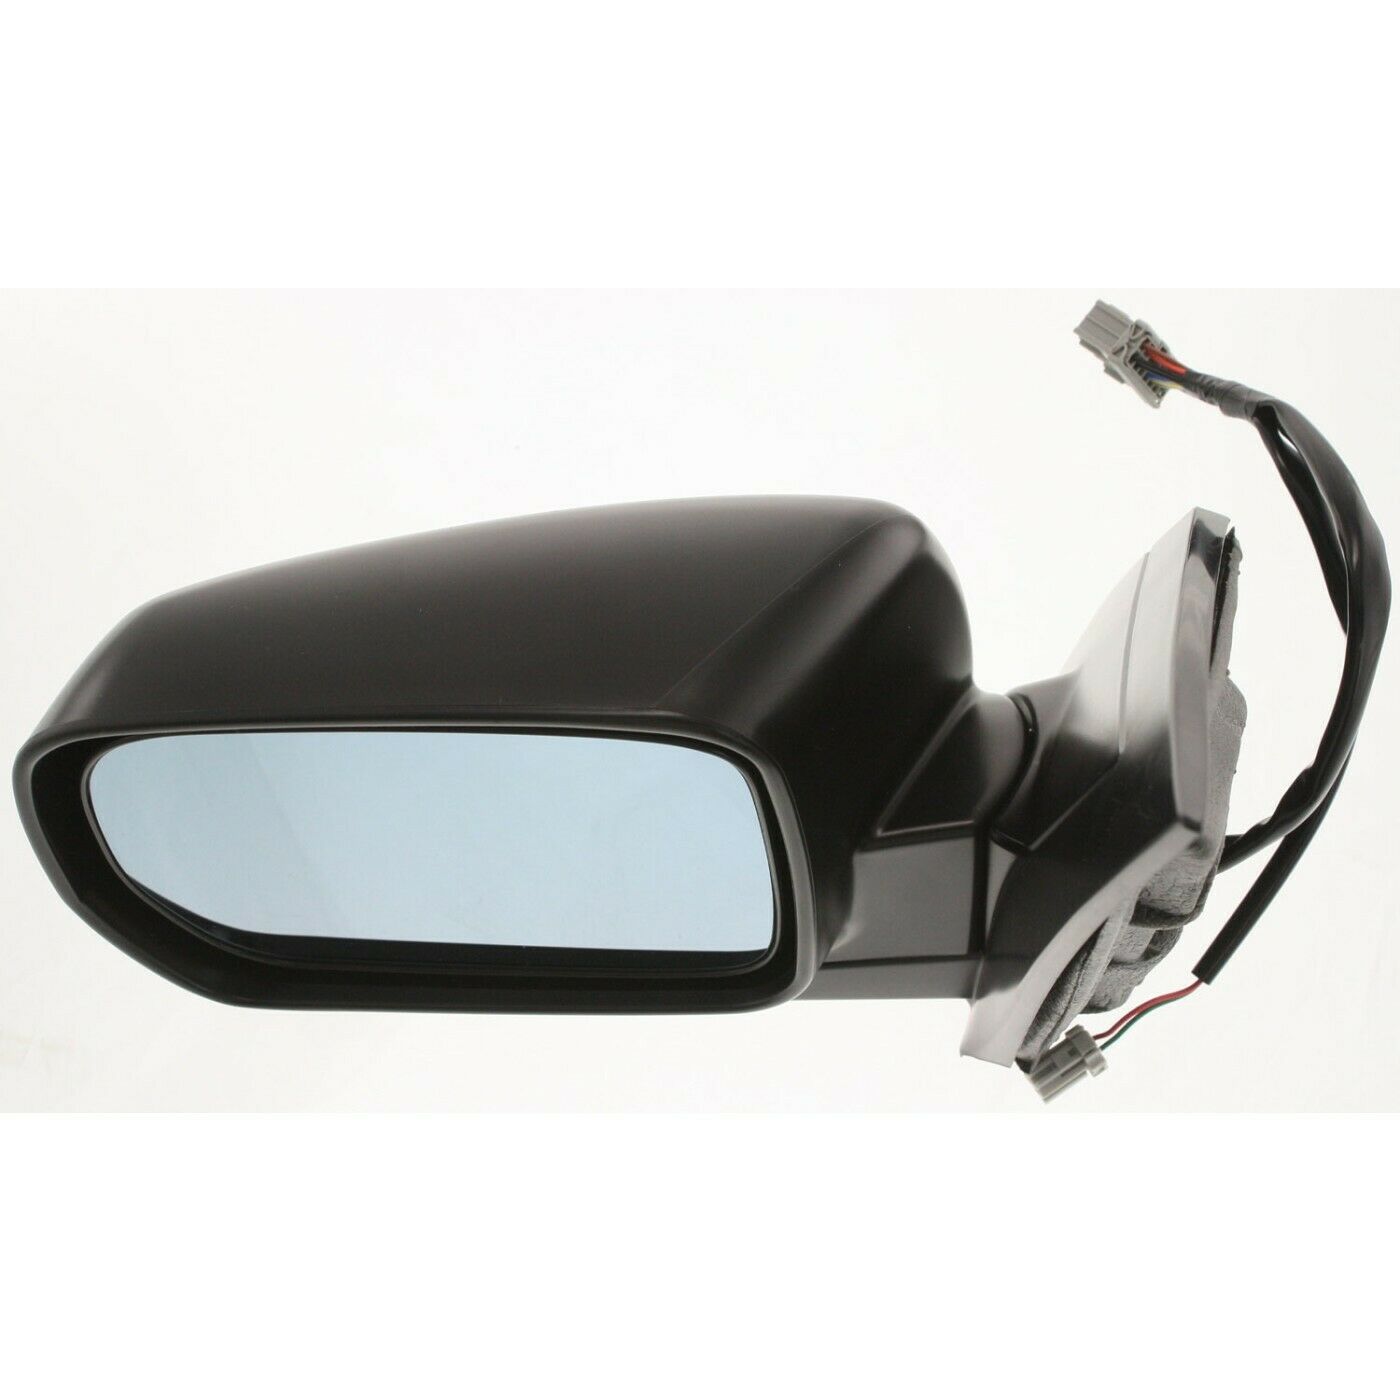 Teledu Folding Power Heated w/ Memory Mirror LH Left Driver For 02-06 MDX Sport Utility - image 4 of 10